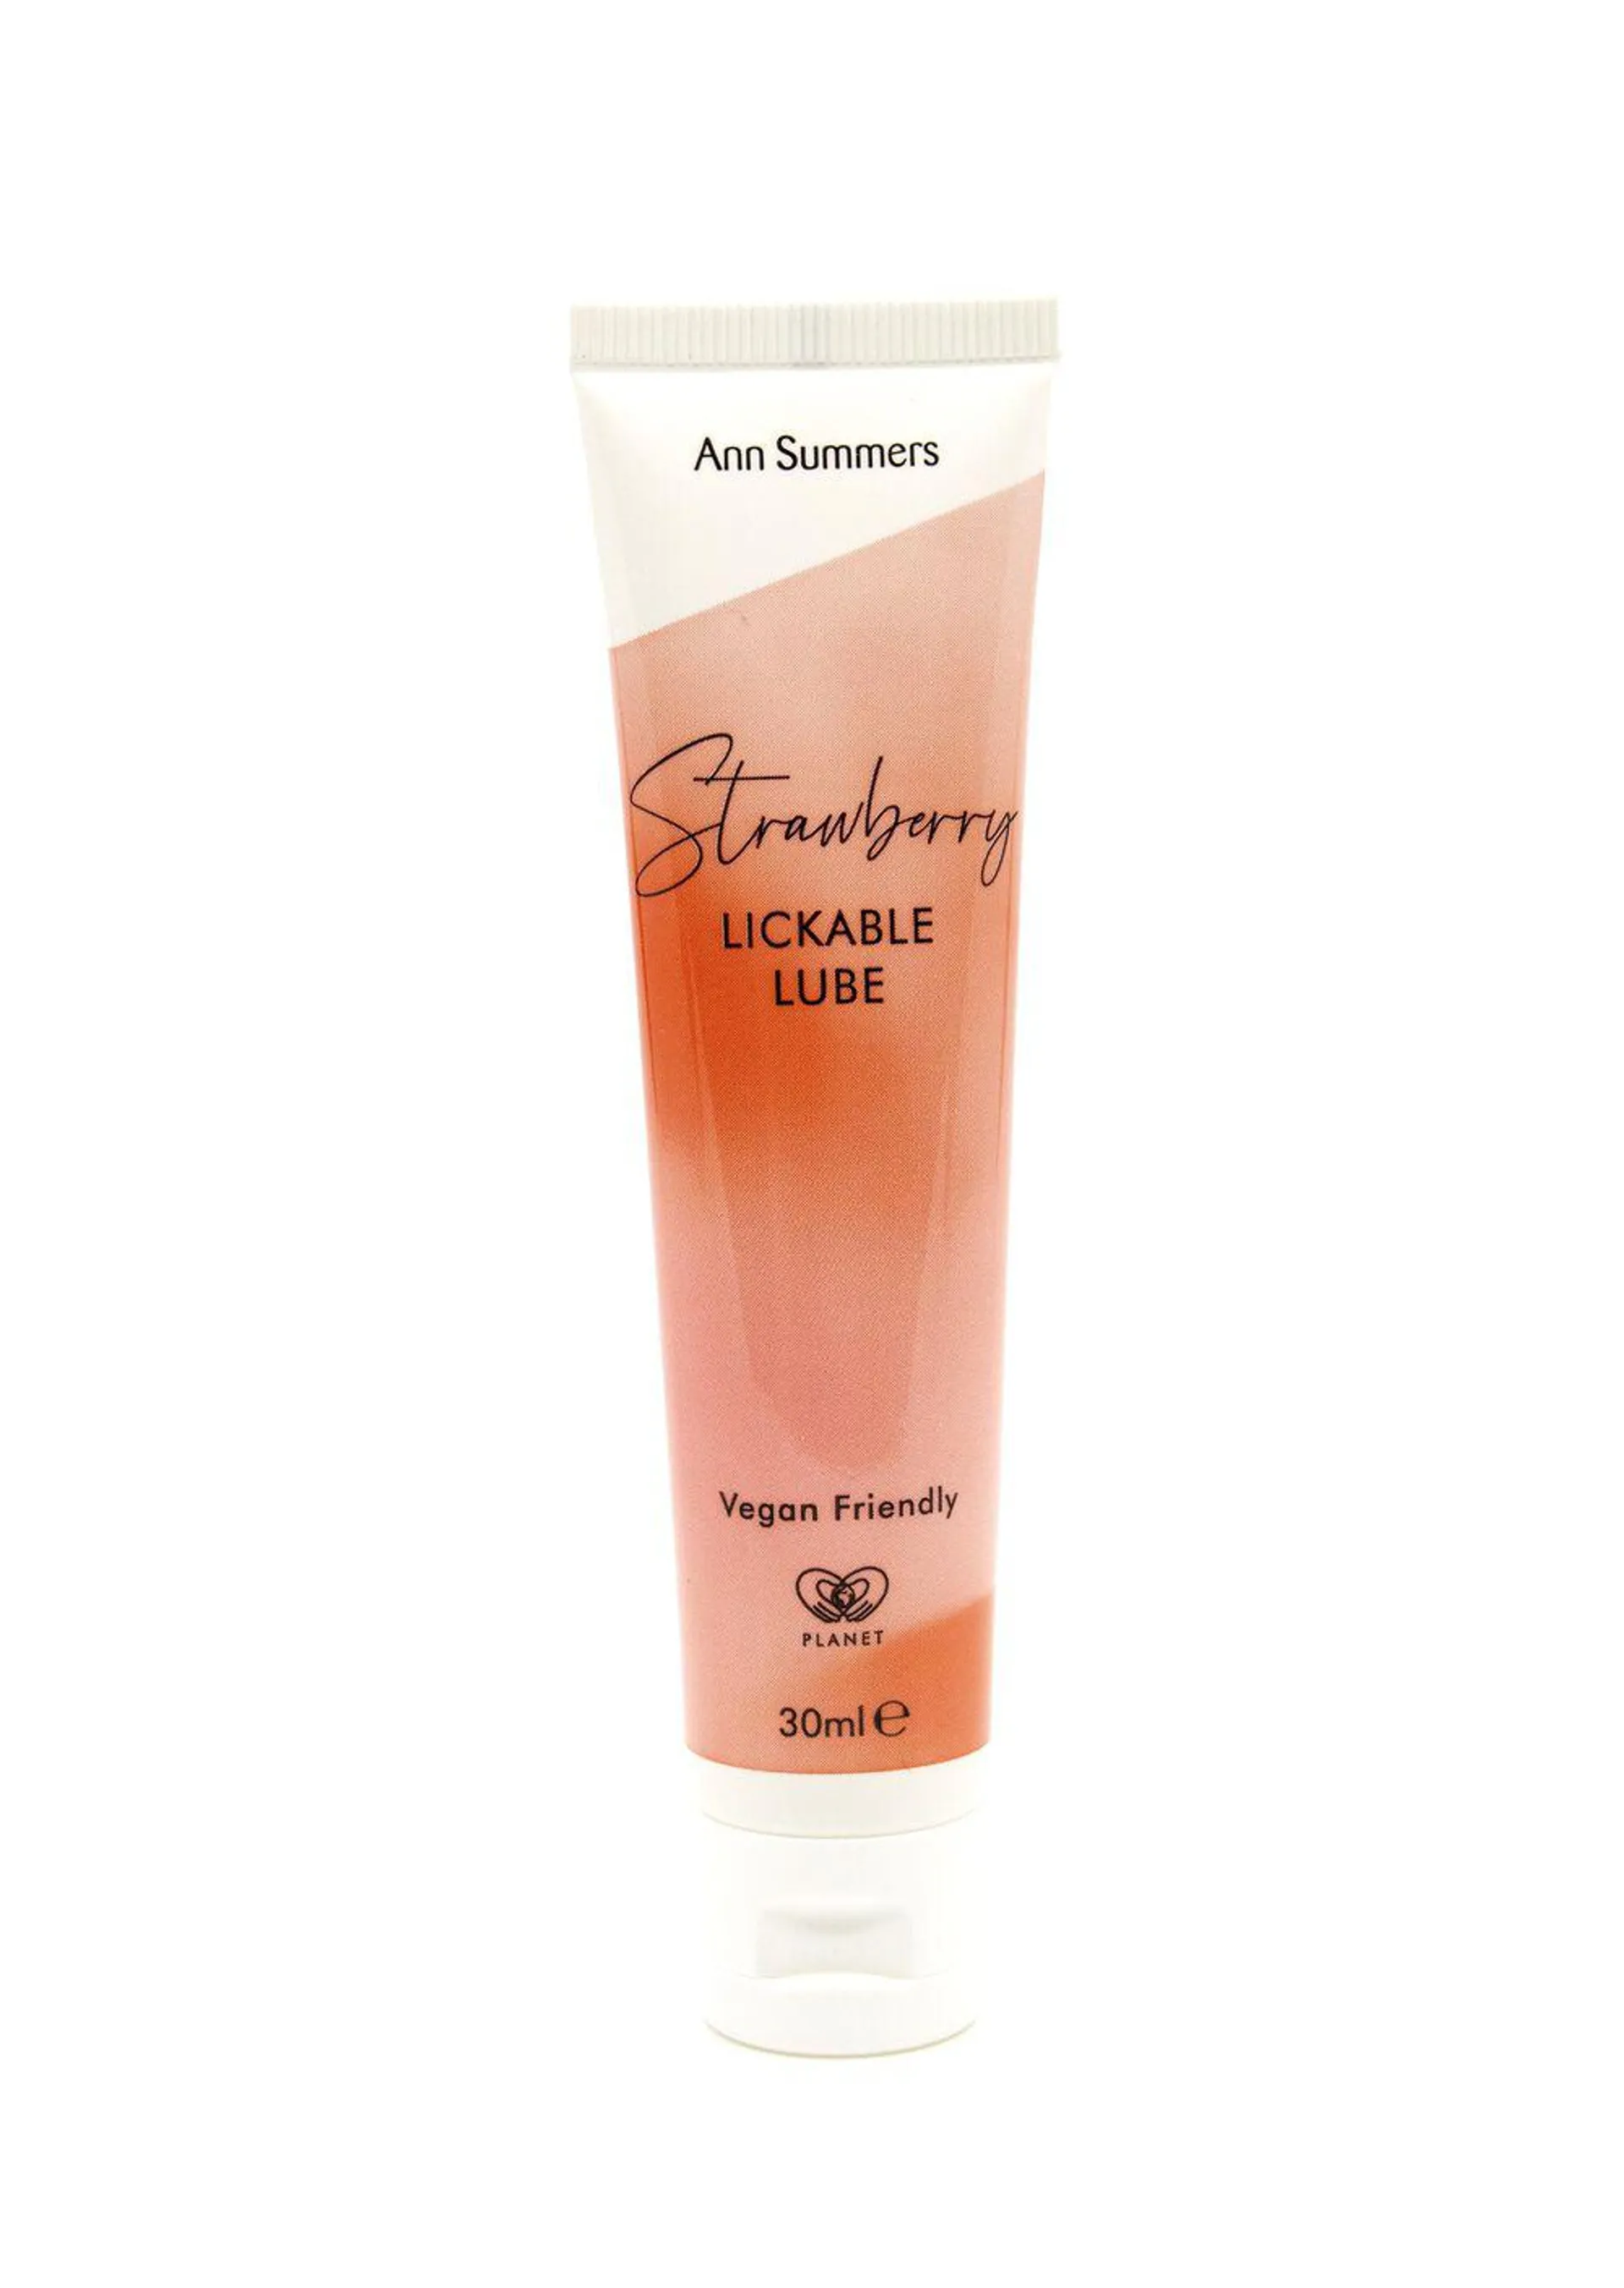 Strawberry Lickable Lube 30ml